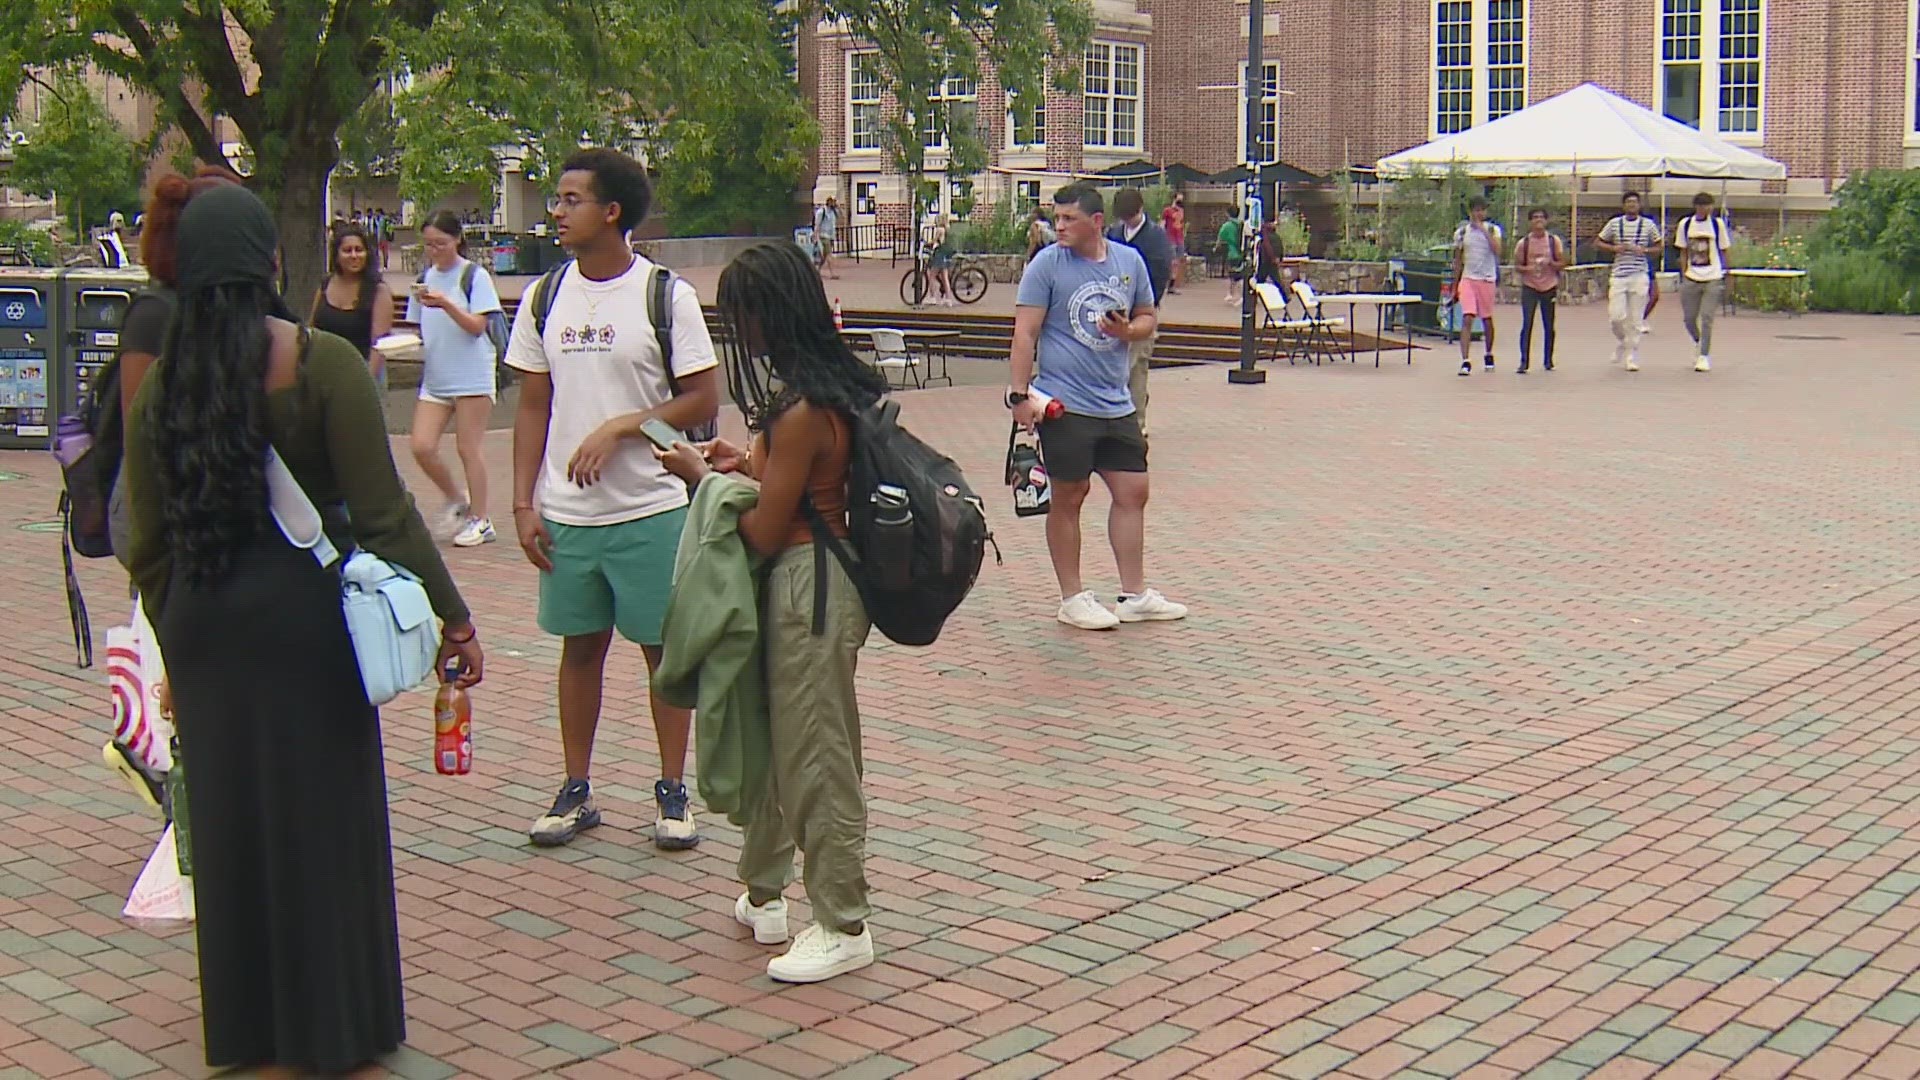 UNC students spent about 90 minutes on lockdown Wednesday. They spent several hours on lockdown after a deadly shooting August 28.